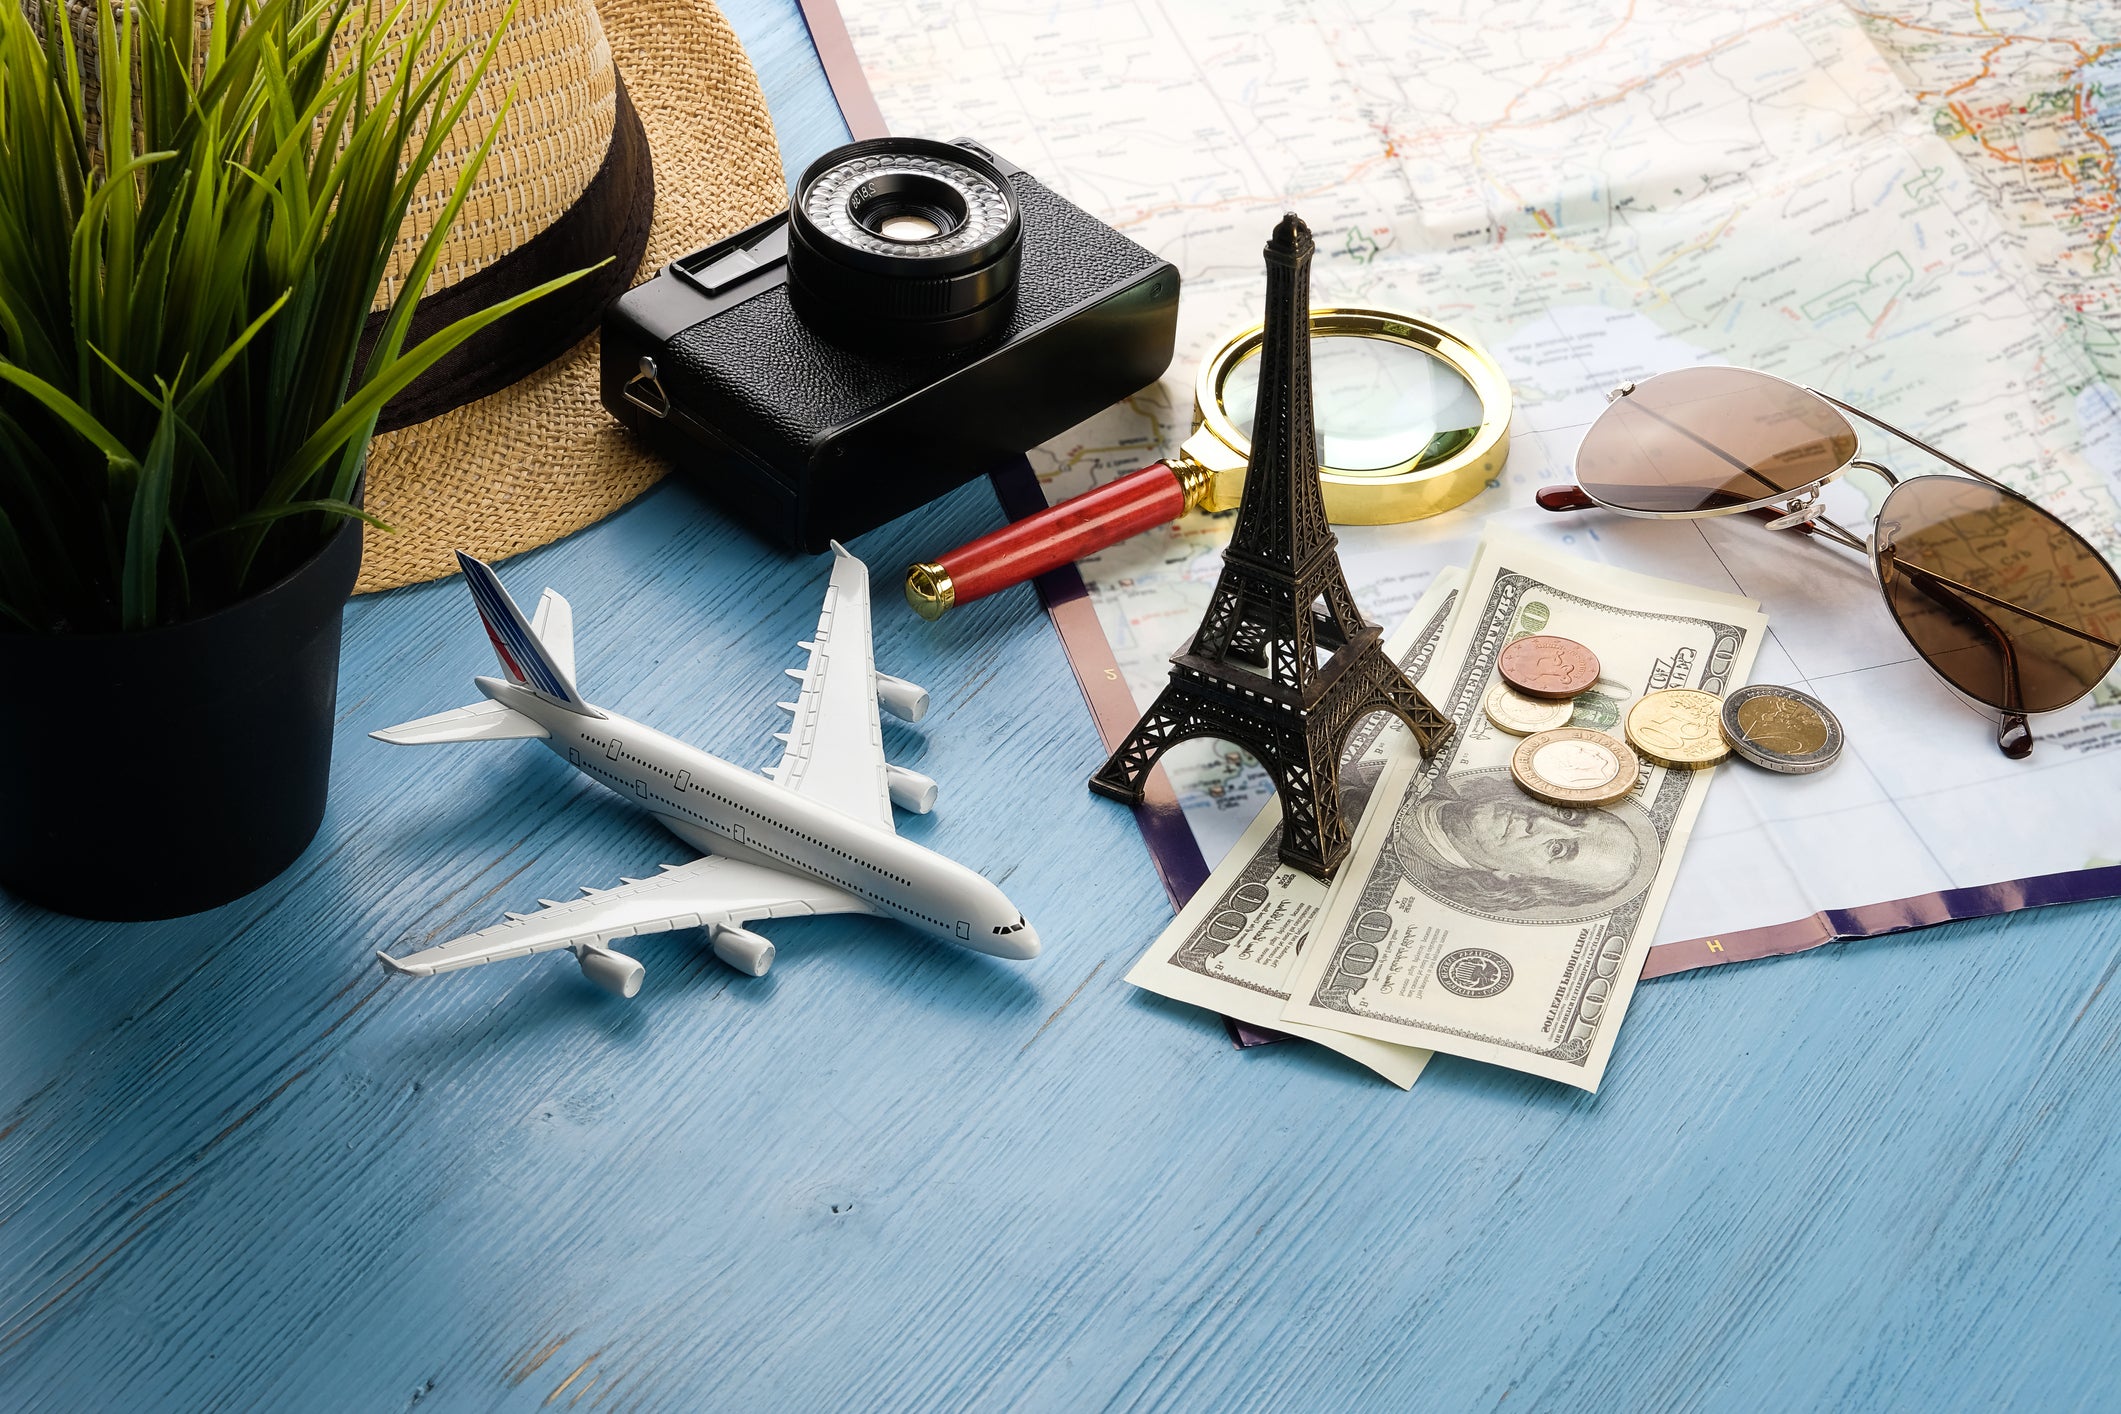 Items For Summer Holidays: Camera, Sunglasses, Cash, Straw Hat, Mobile Phone, Map And Travel Plan. Tourist layout-set and accessories of the Traveler, On a wooden background. Open borders concept for free happy travel. A copy of the text space.